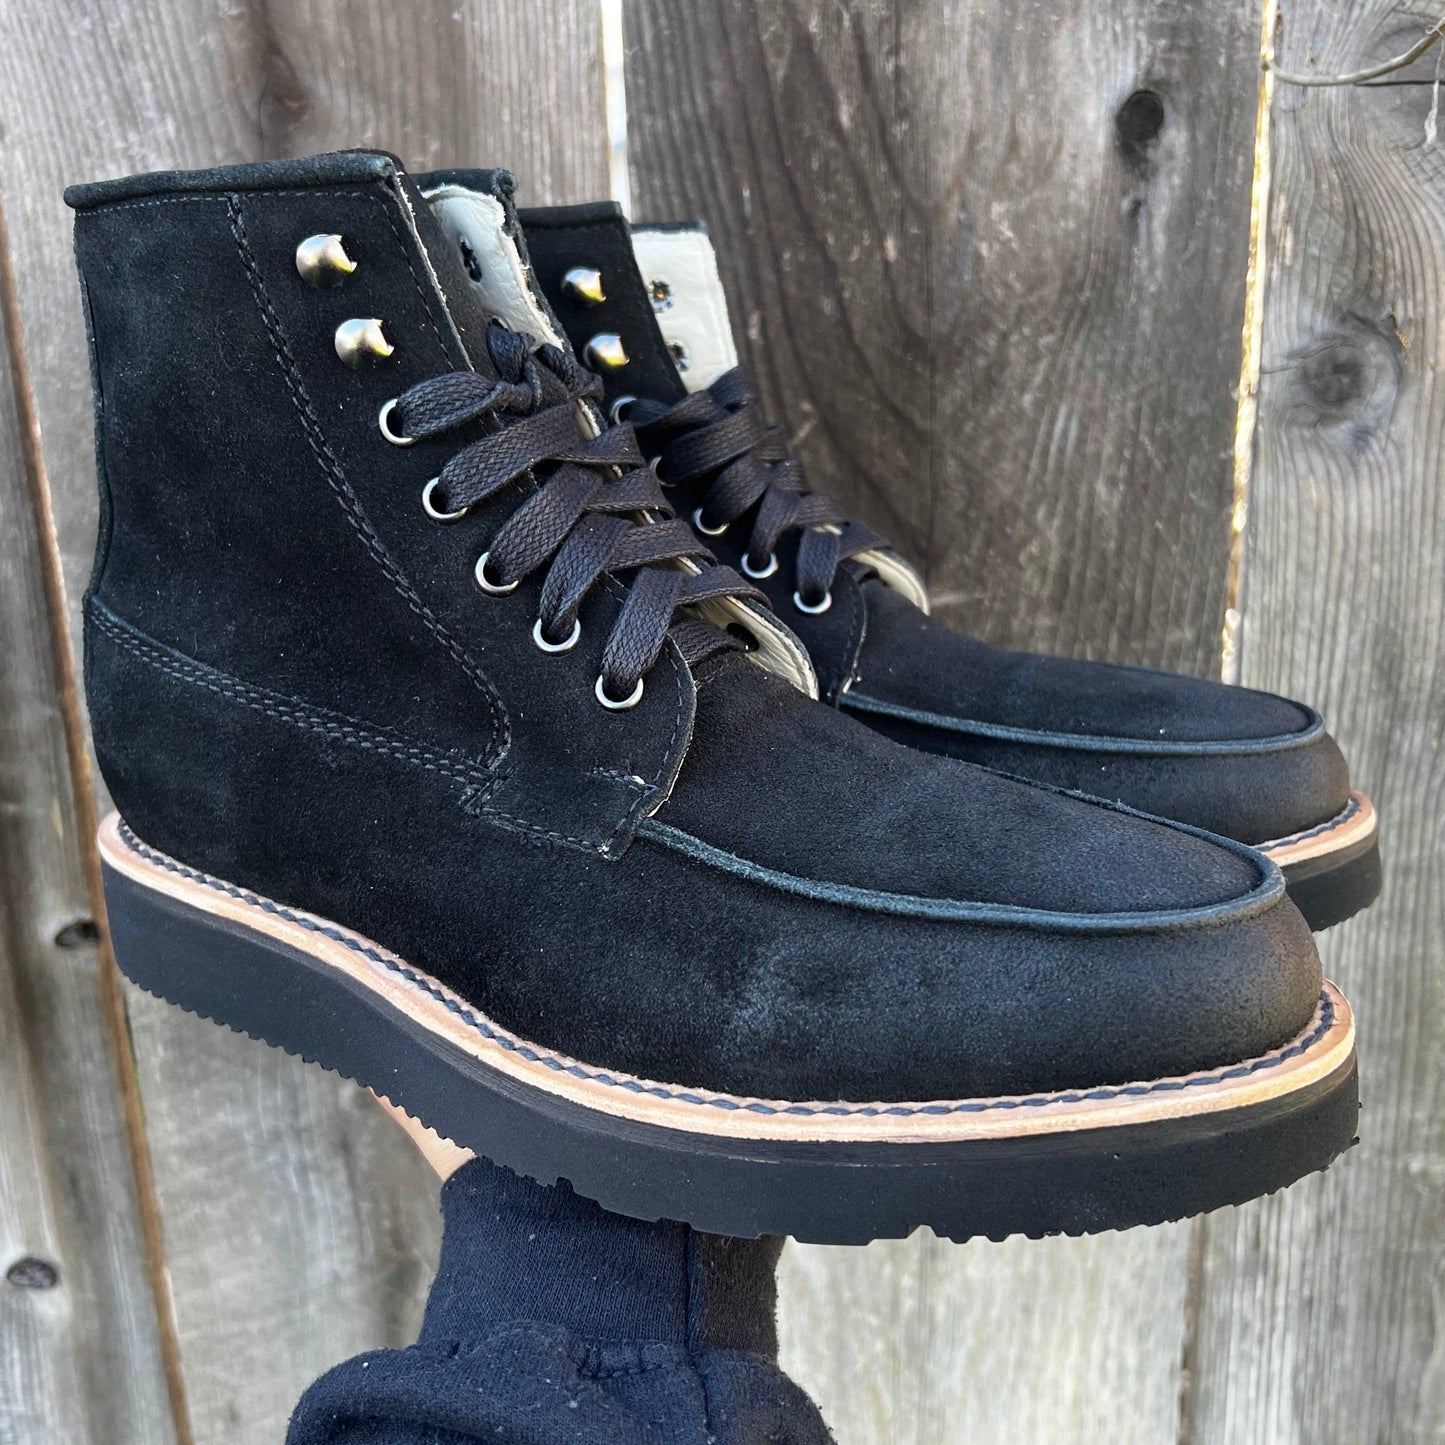 Waxed Suede Midnight Nomad Size 7.5 Item #0804 - DIEVIER